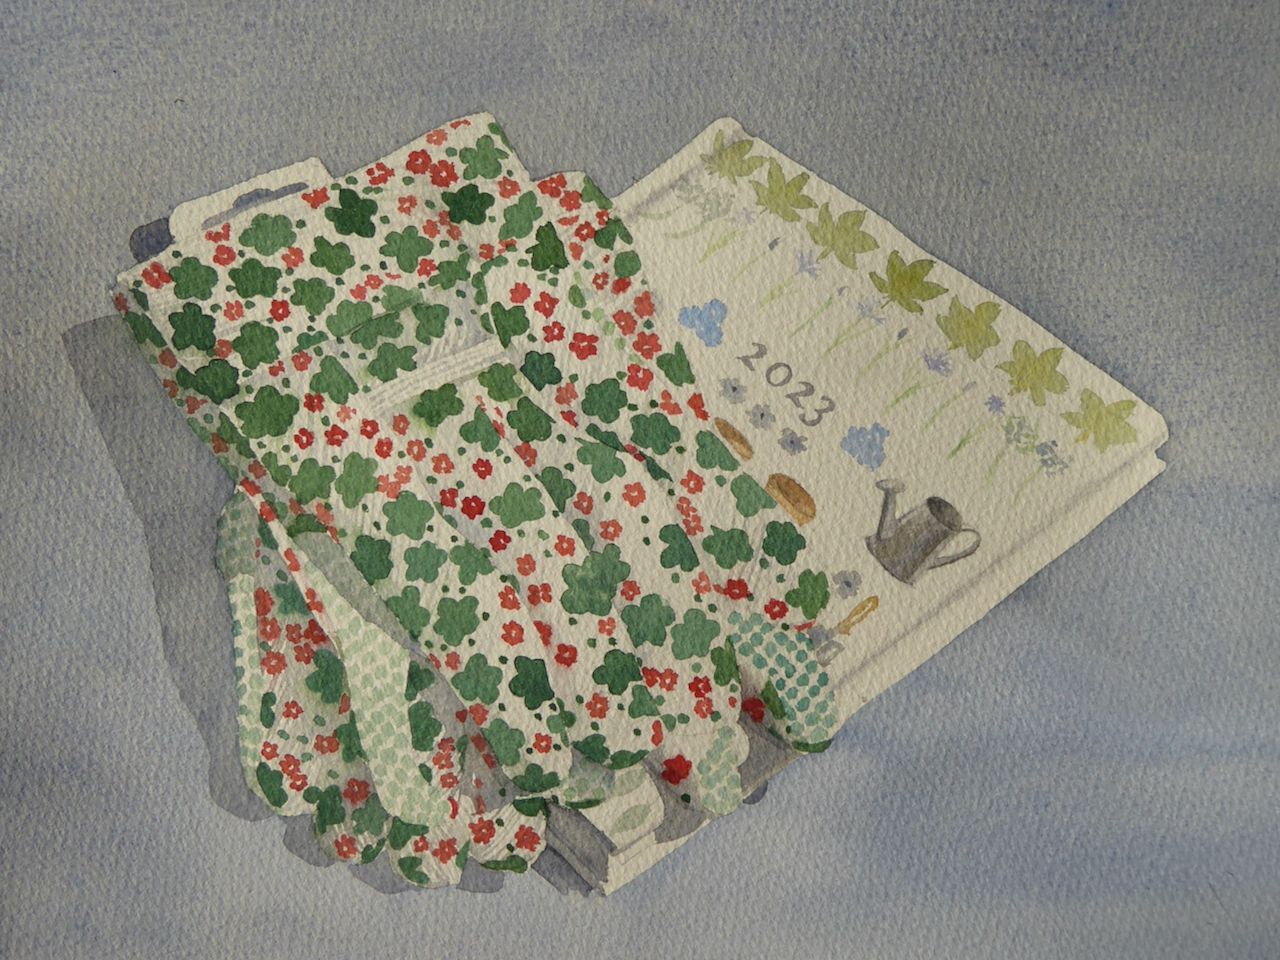 “Gardening Gifts” a watercolour painting of gardening gloves and gardener's diary by Lesley Linley, using A J Ludlow Professional Watercolours